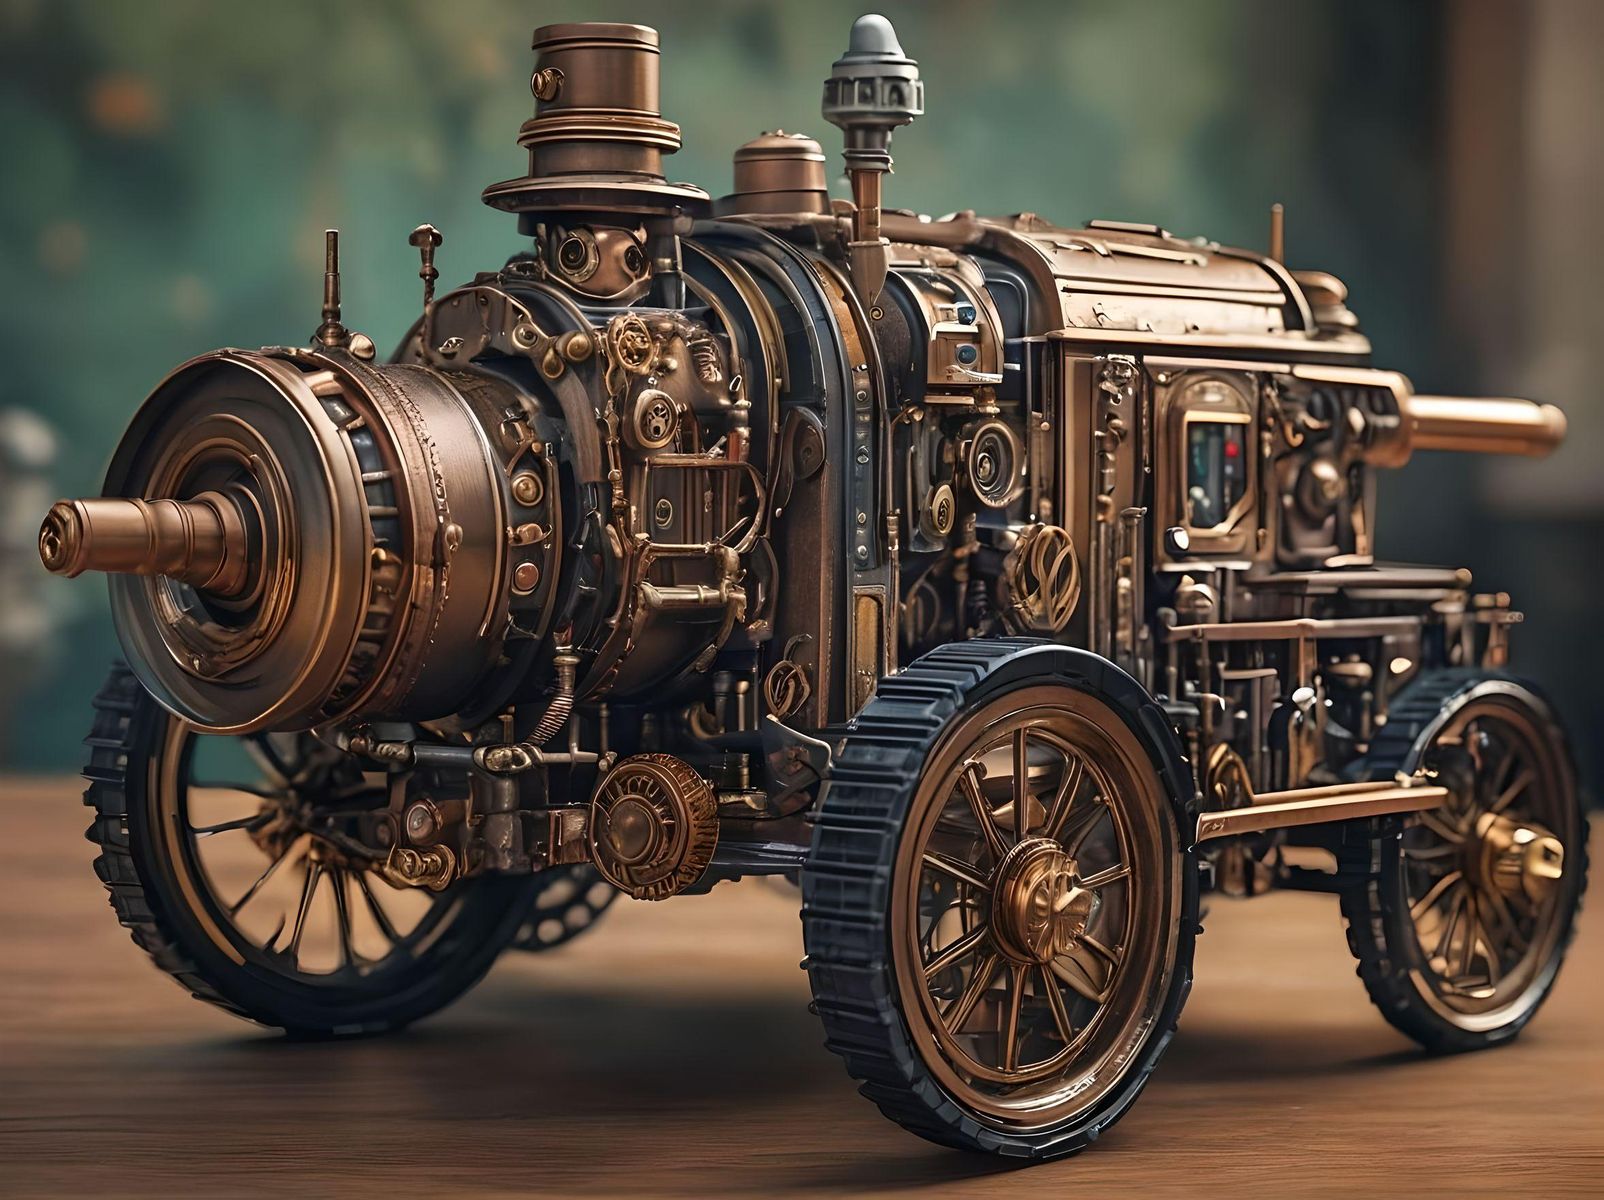 Mechanical children's toy in style of steampunk